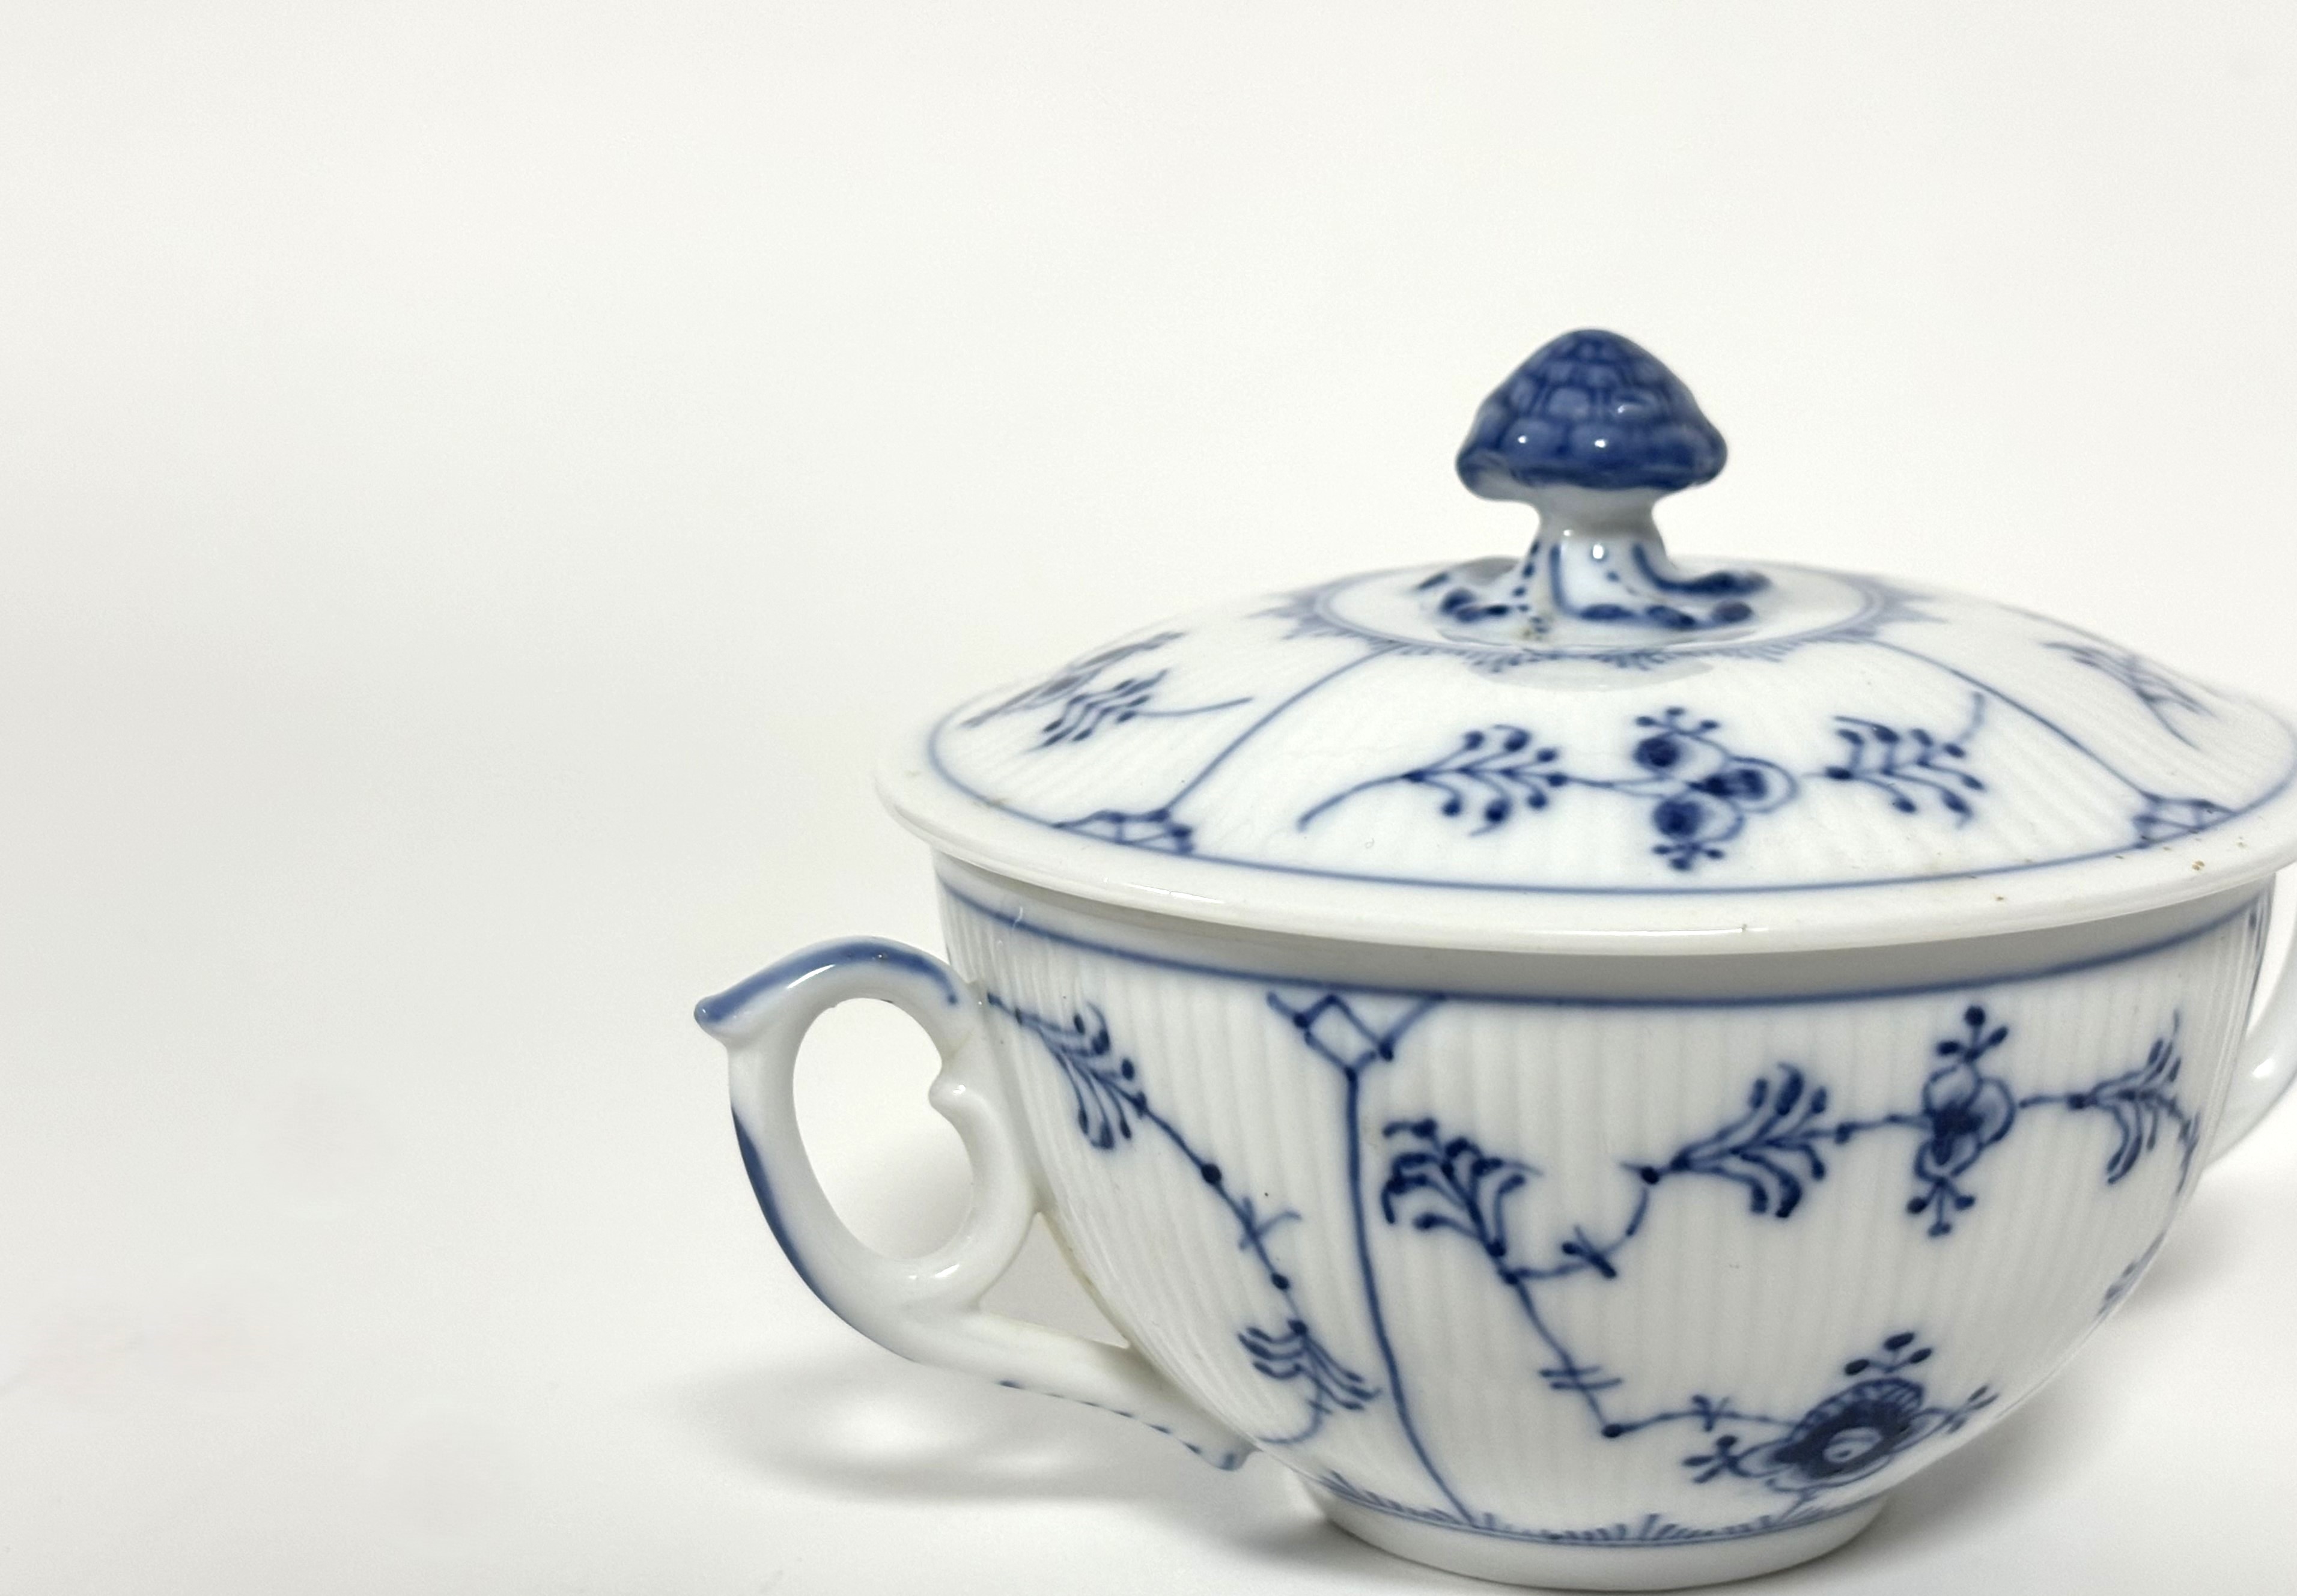 A set of six Royal Copenhagen soup cups and covers in the plain fluted blue pattern (Musselmalet), - Image 4 of 8